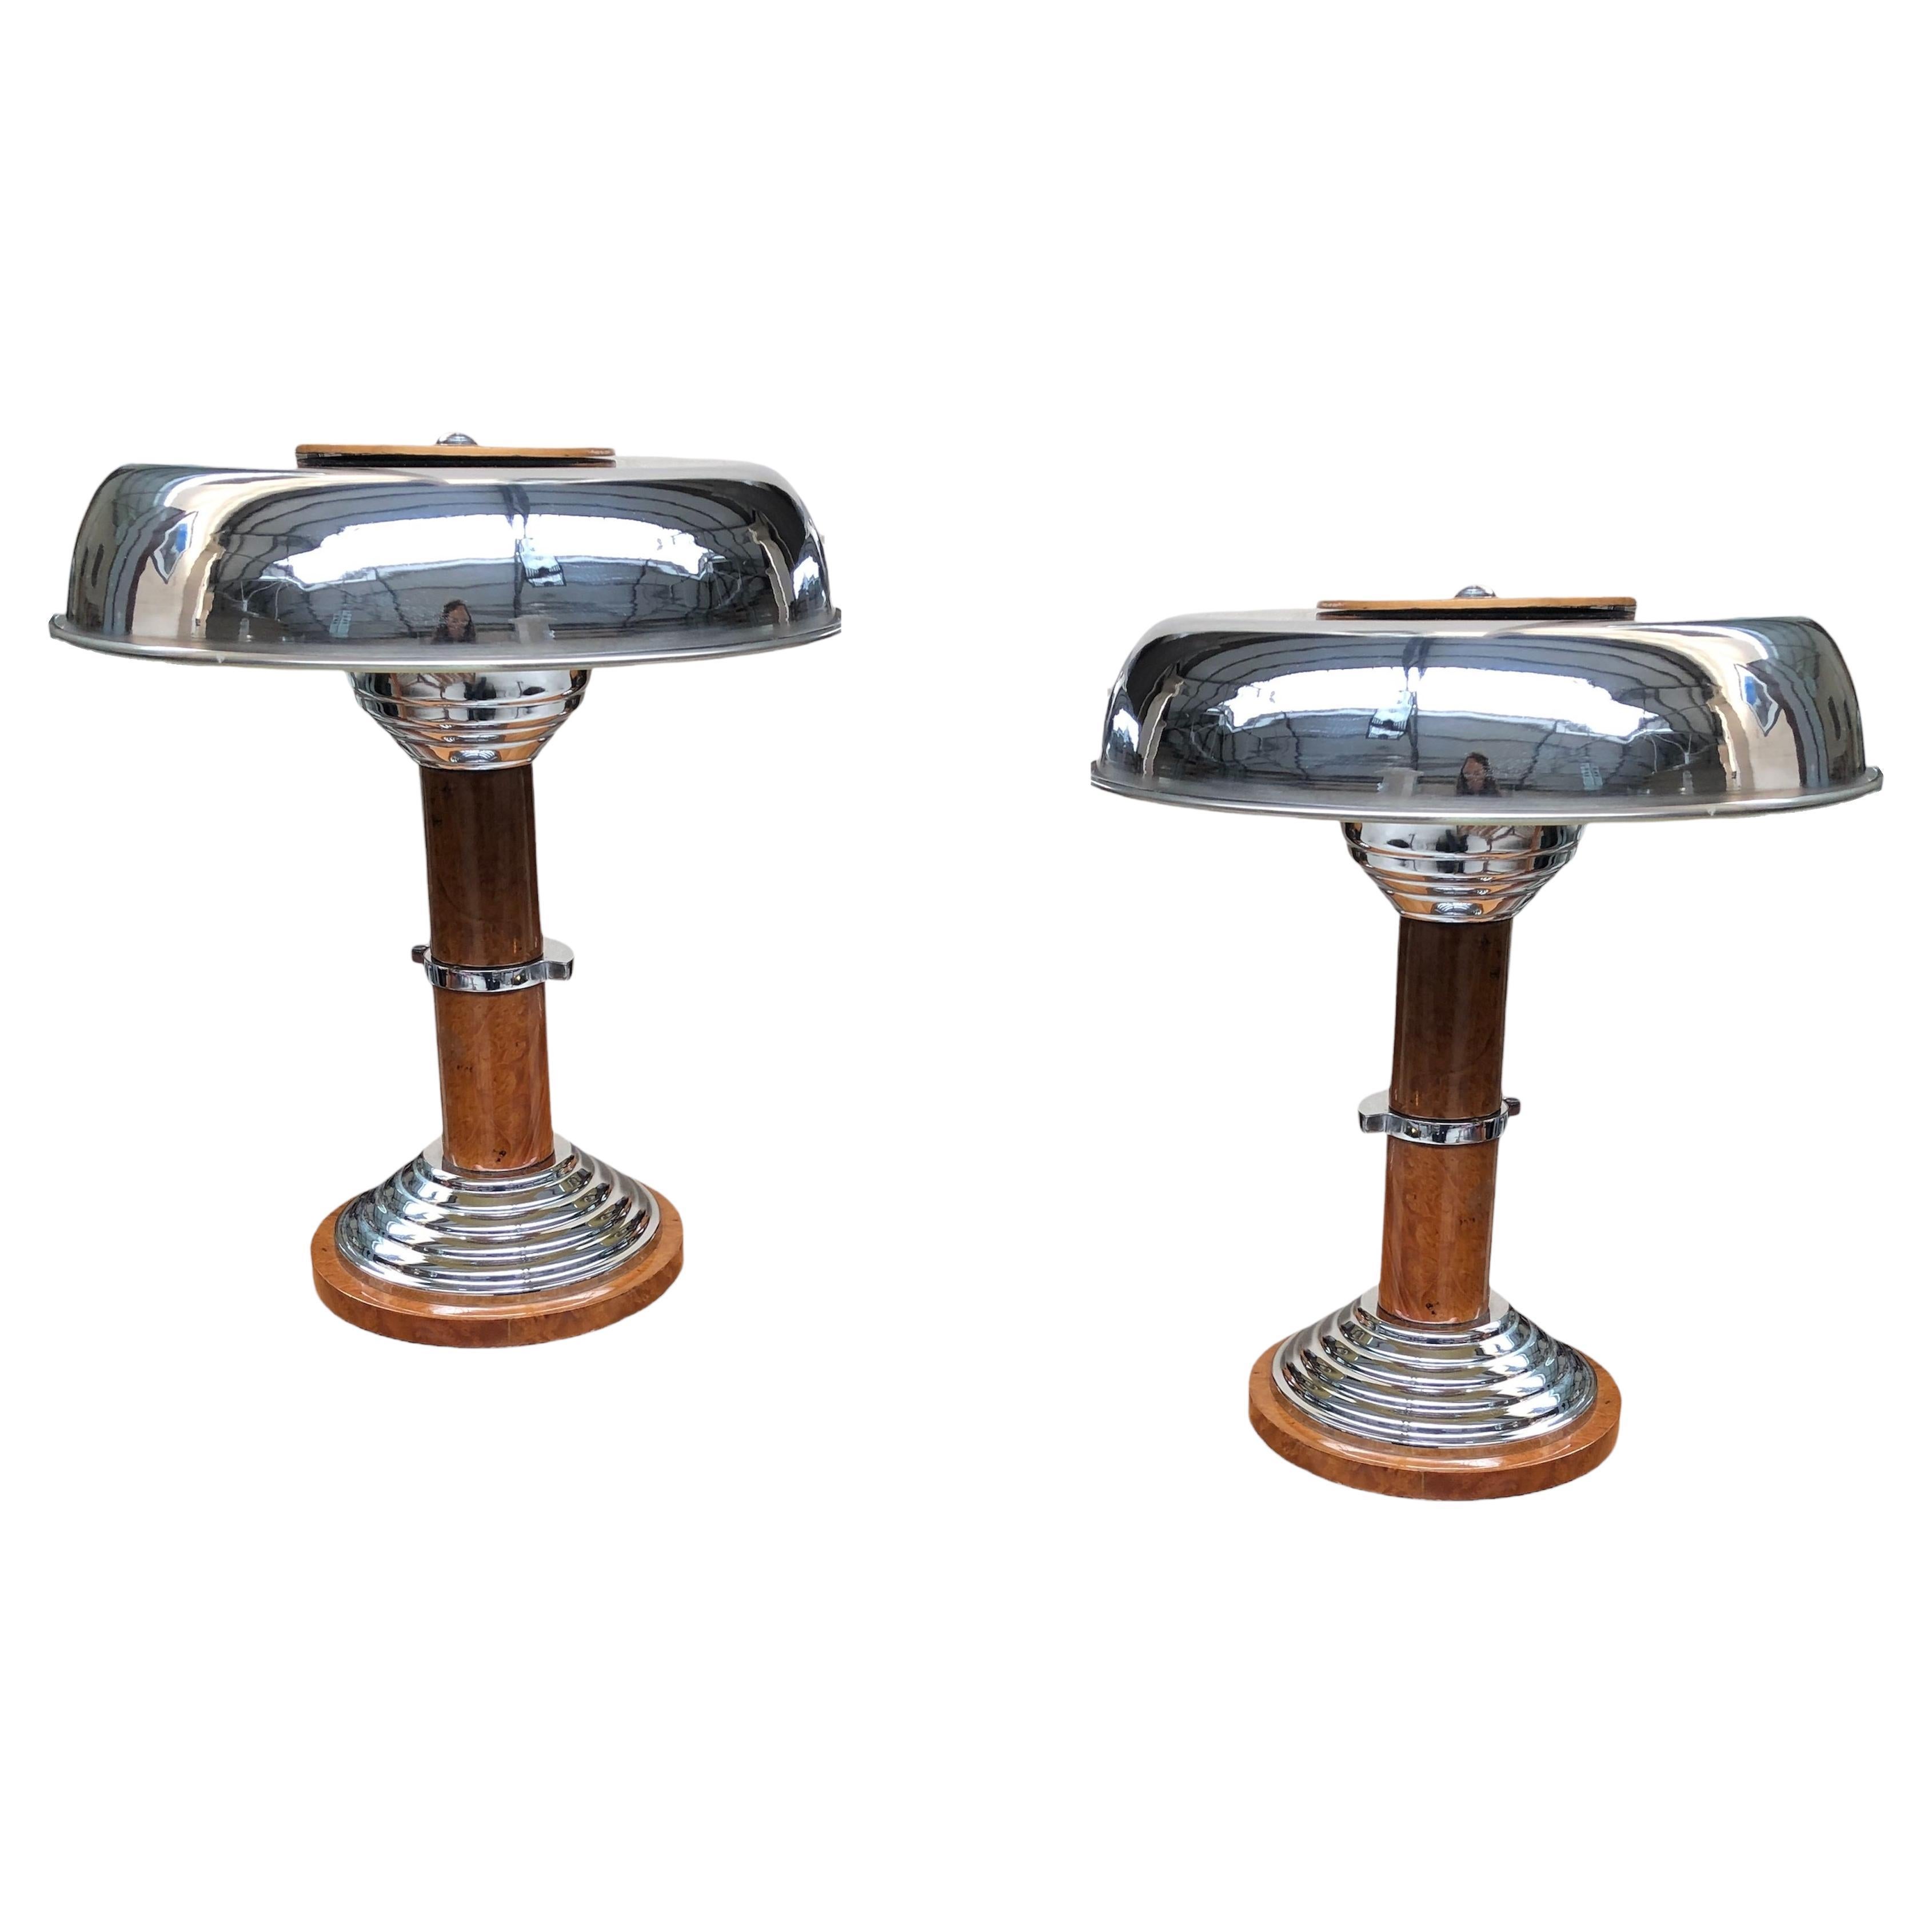 Pair of Art Deco Lamp in Chrome and Wood, France, 1920 For Sale